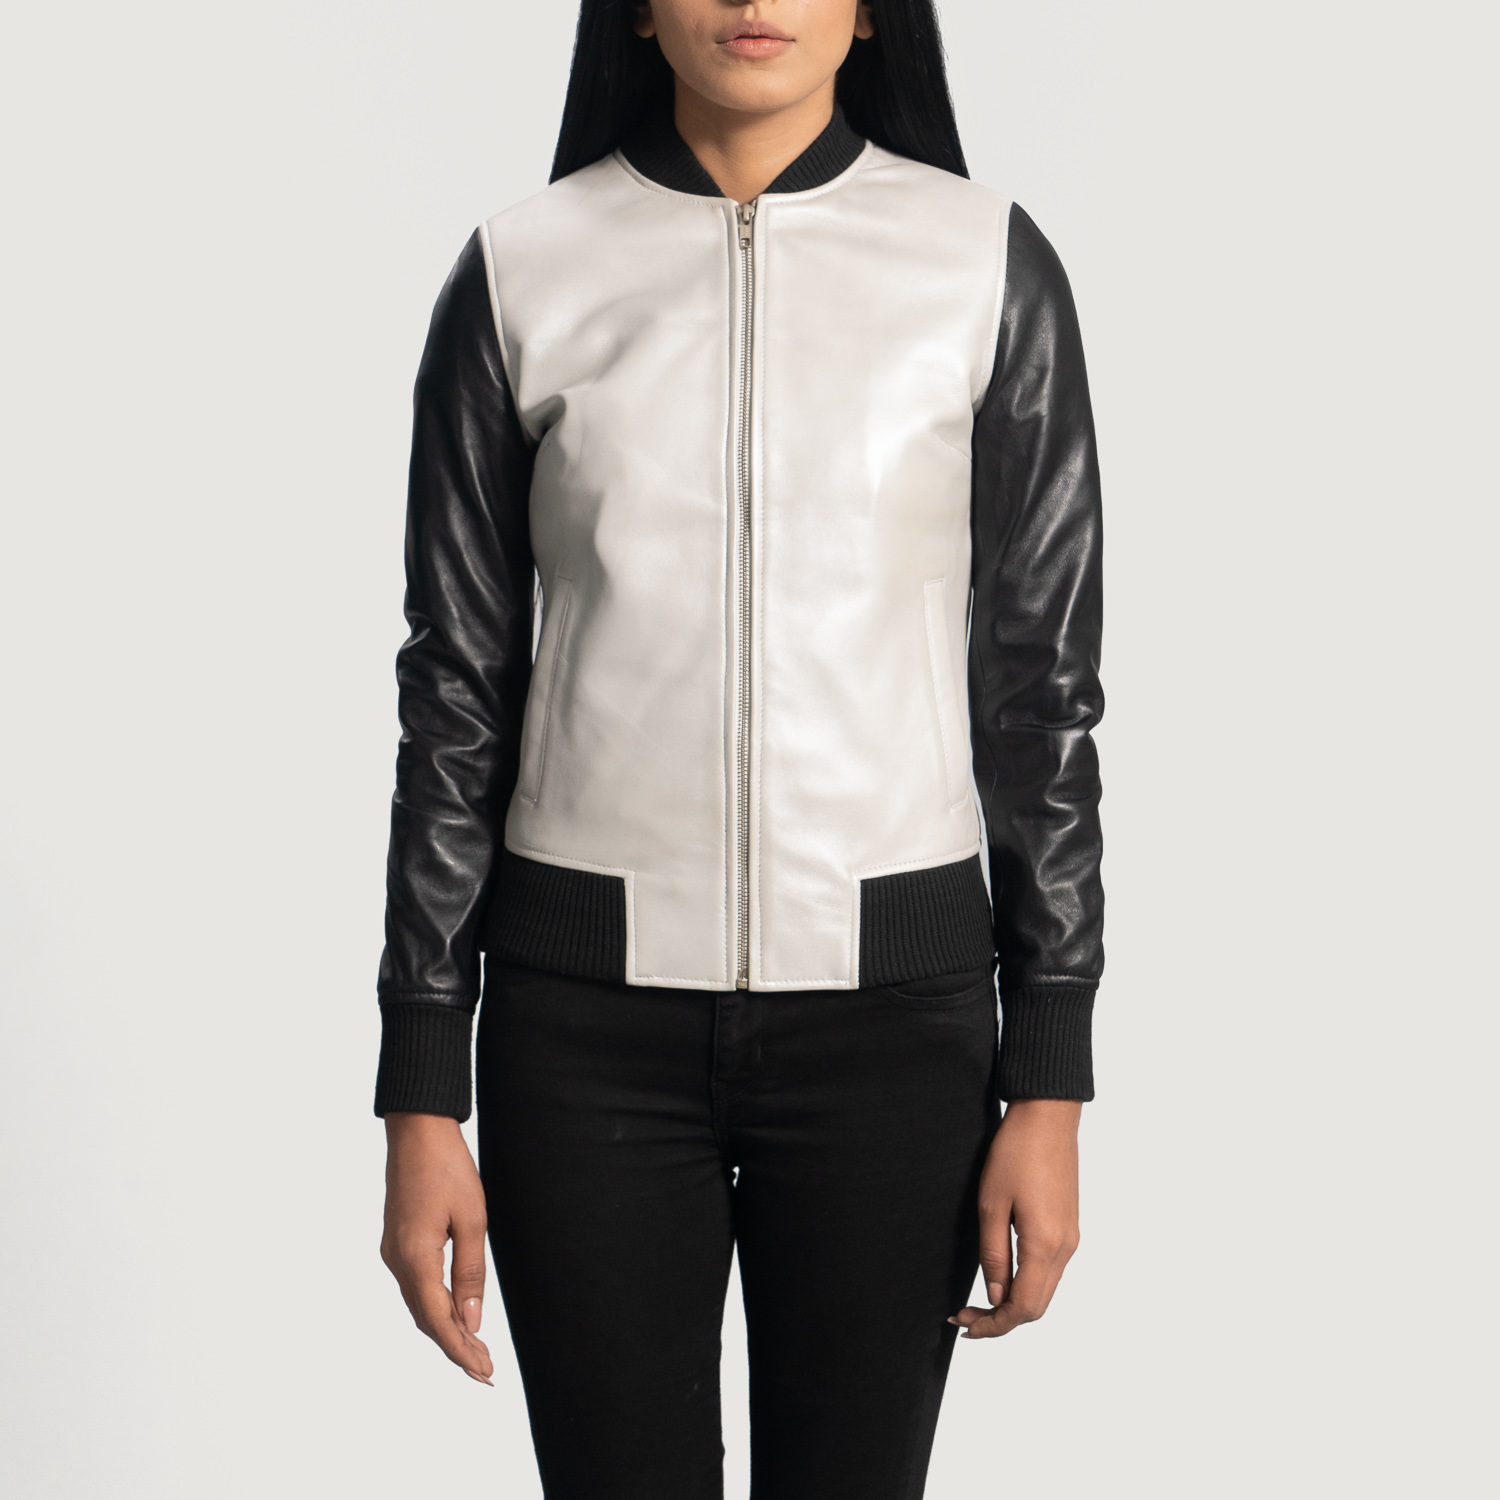 A Classic Style Bomber Jacket By The Jacket Maker